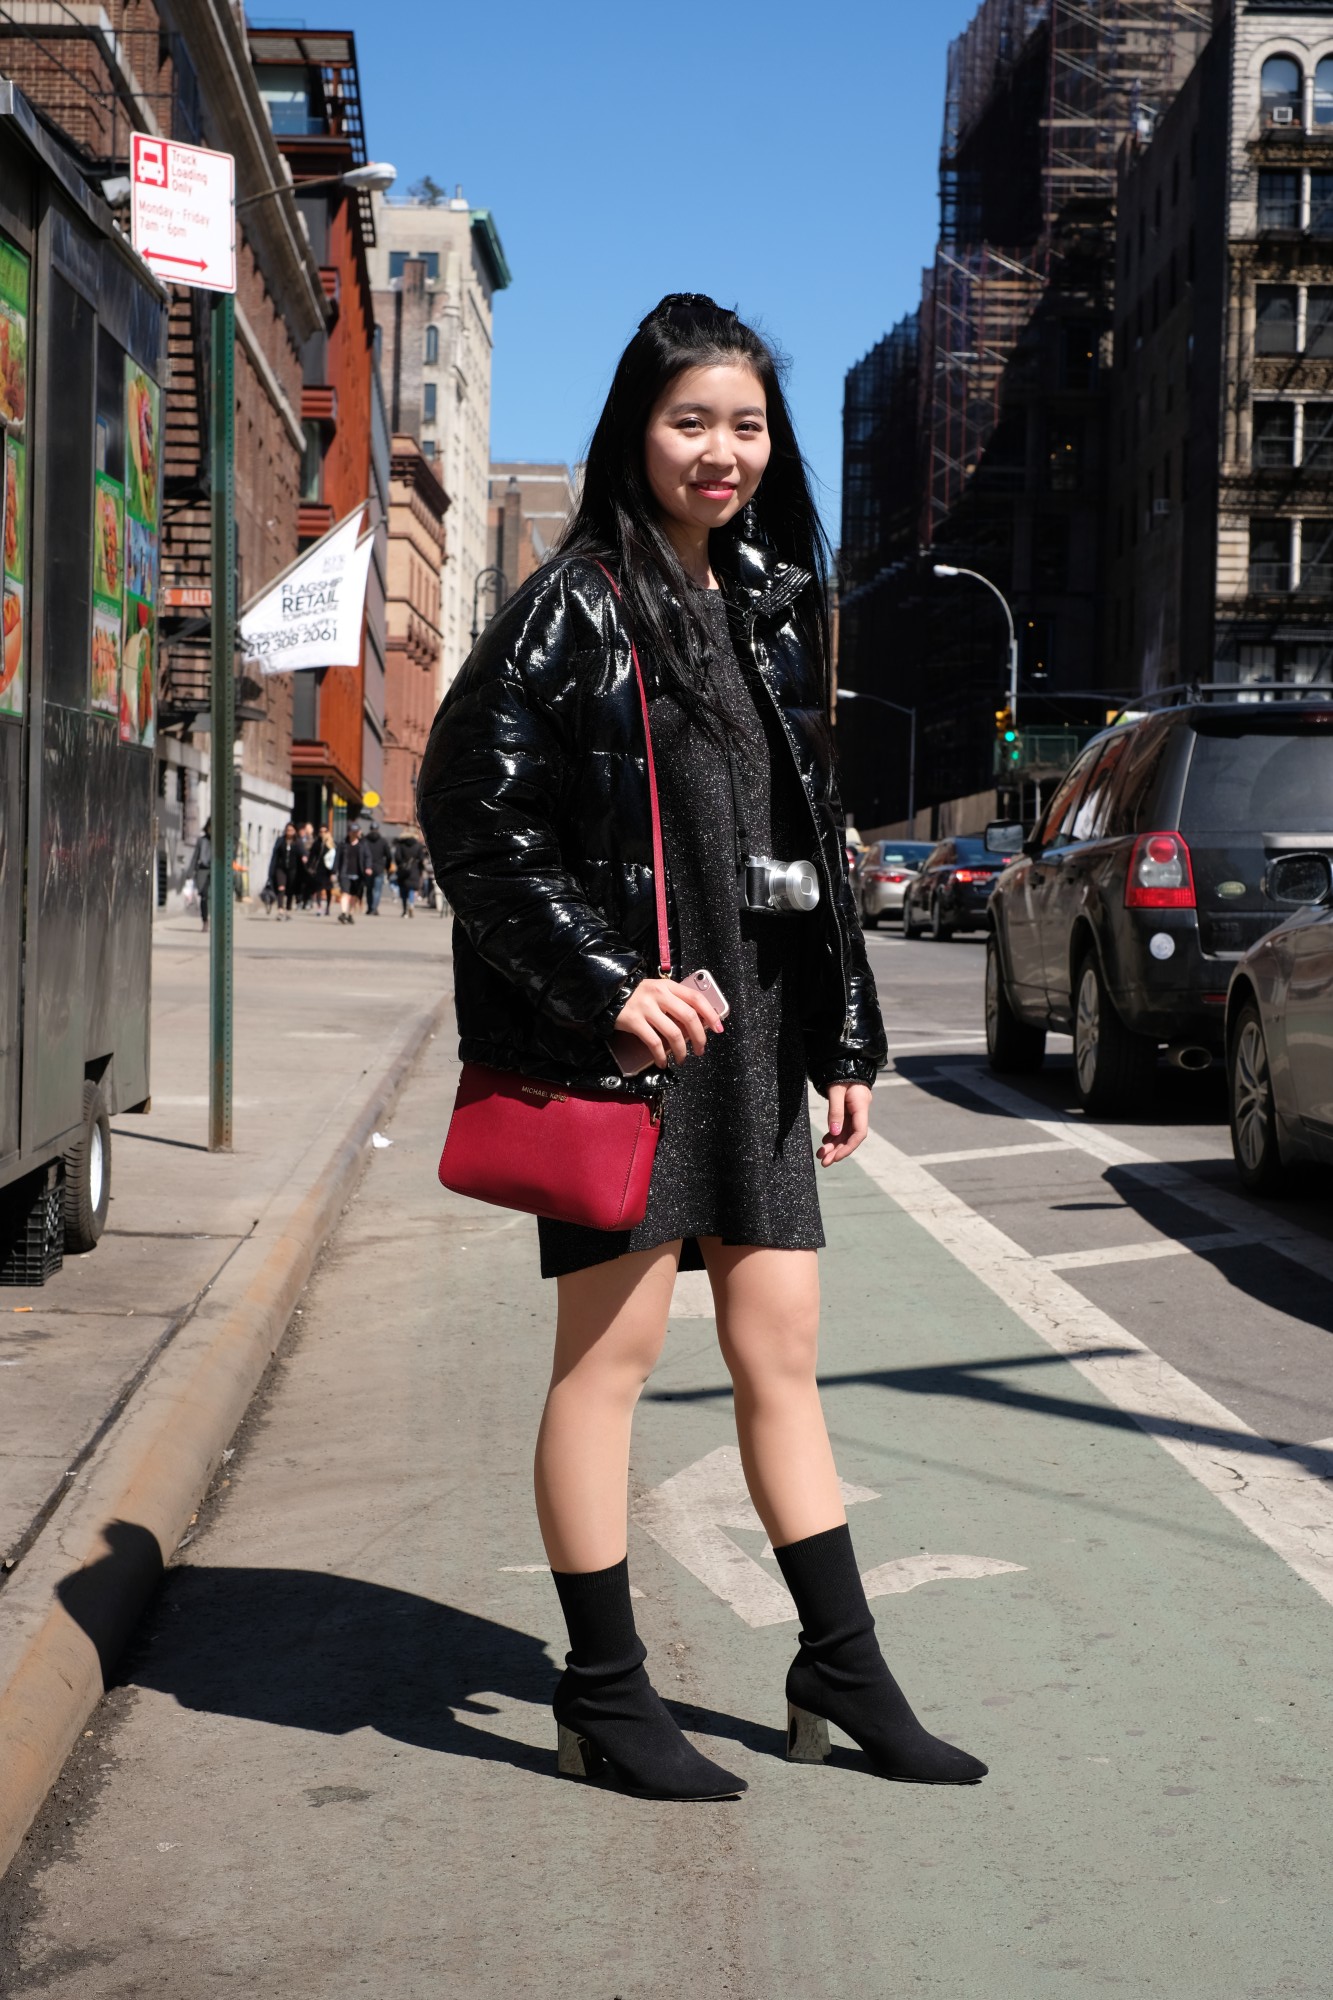 Asian girl in black outfit in NYC